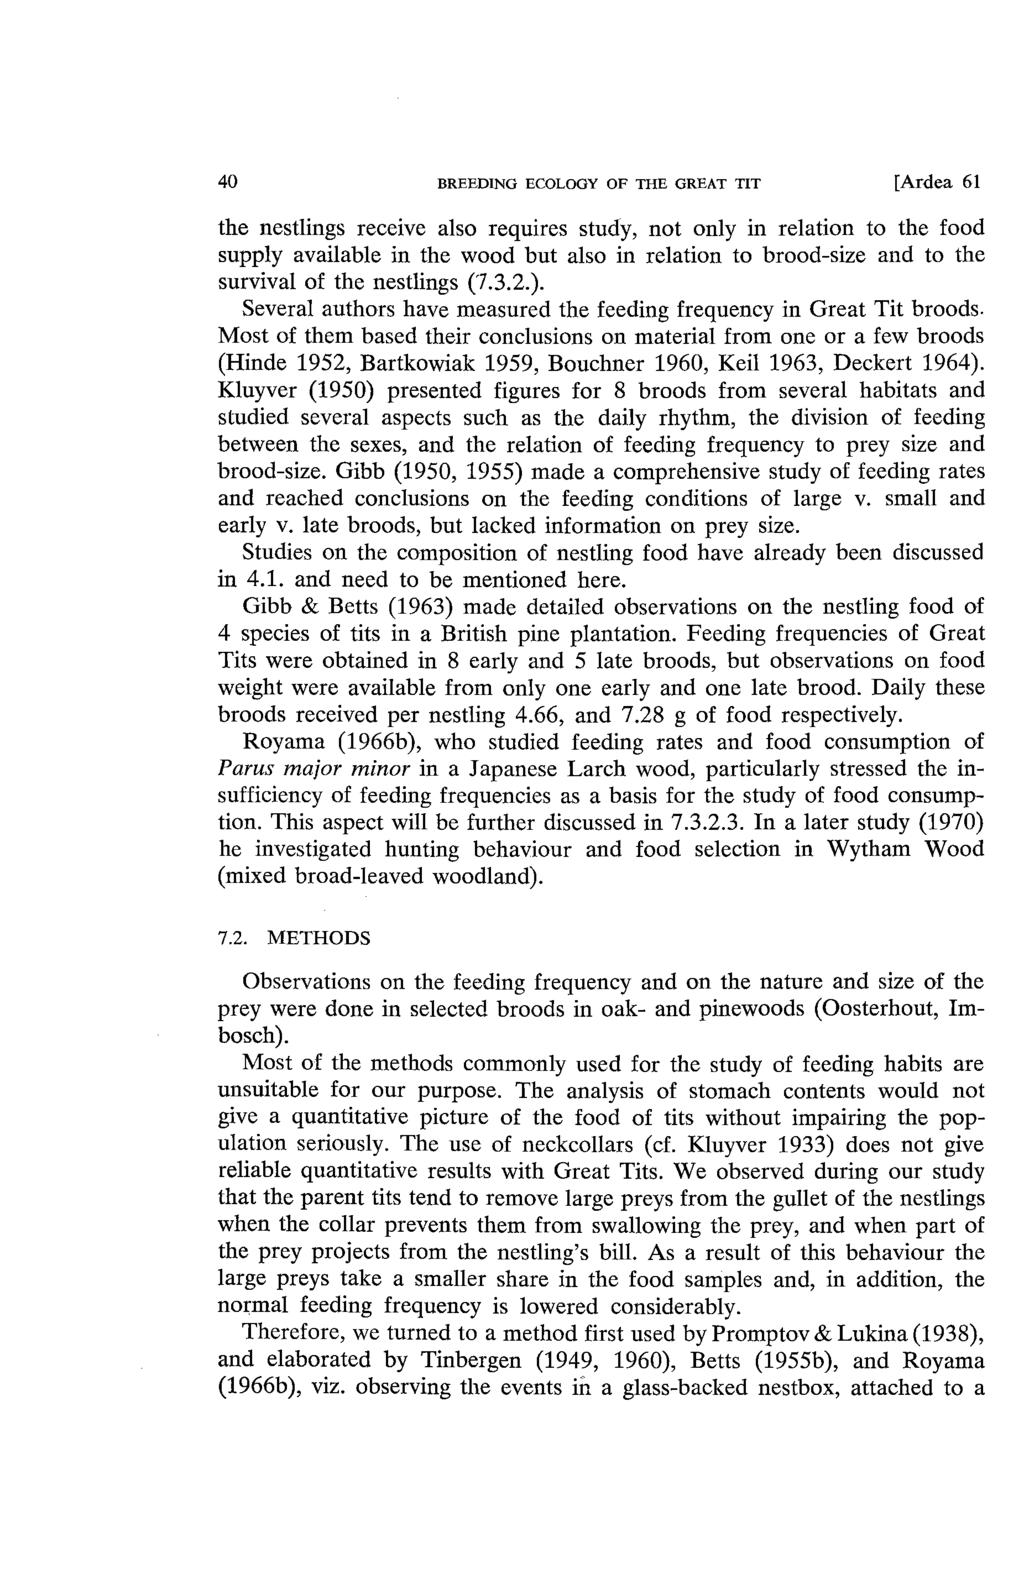 40 BREEDING ECOLOGY OF THE GREAT TIT [Ardea 61 the nestlings receive also requires study, not only in relation to the food supply available in the wood but also in relation to brood-size and to the